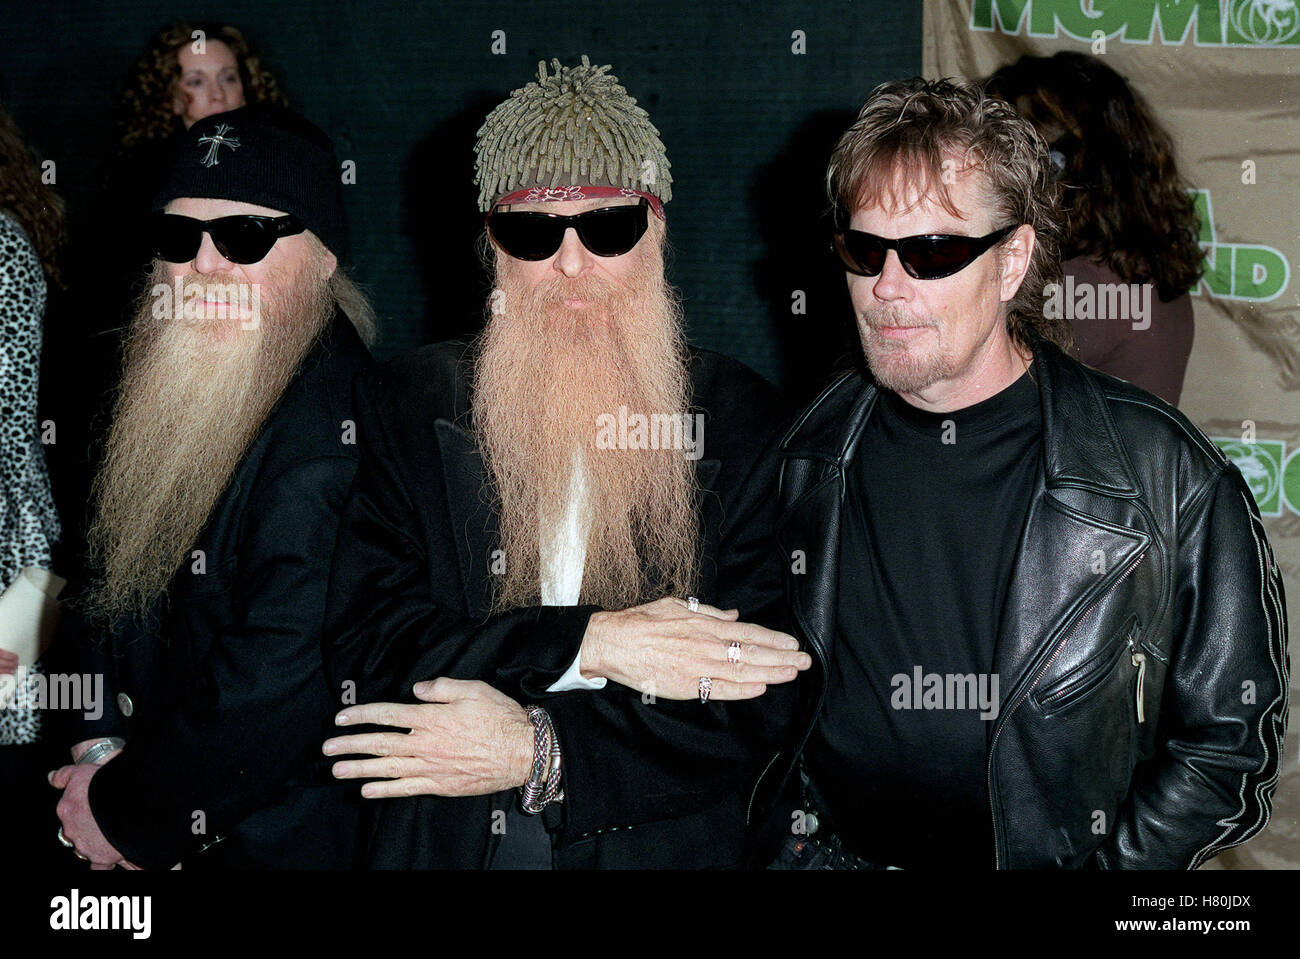 Zz Top Las Vegas Usa High Resolution Stock Photography and Images - Alamy